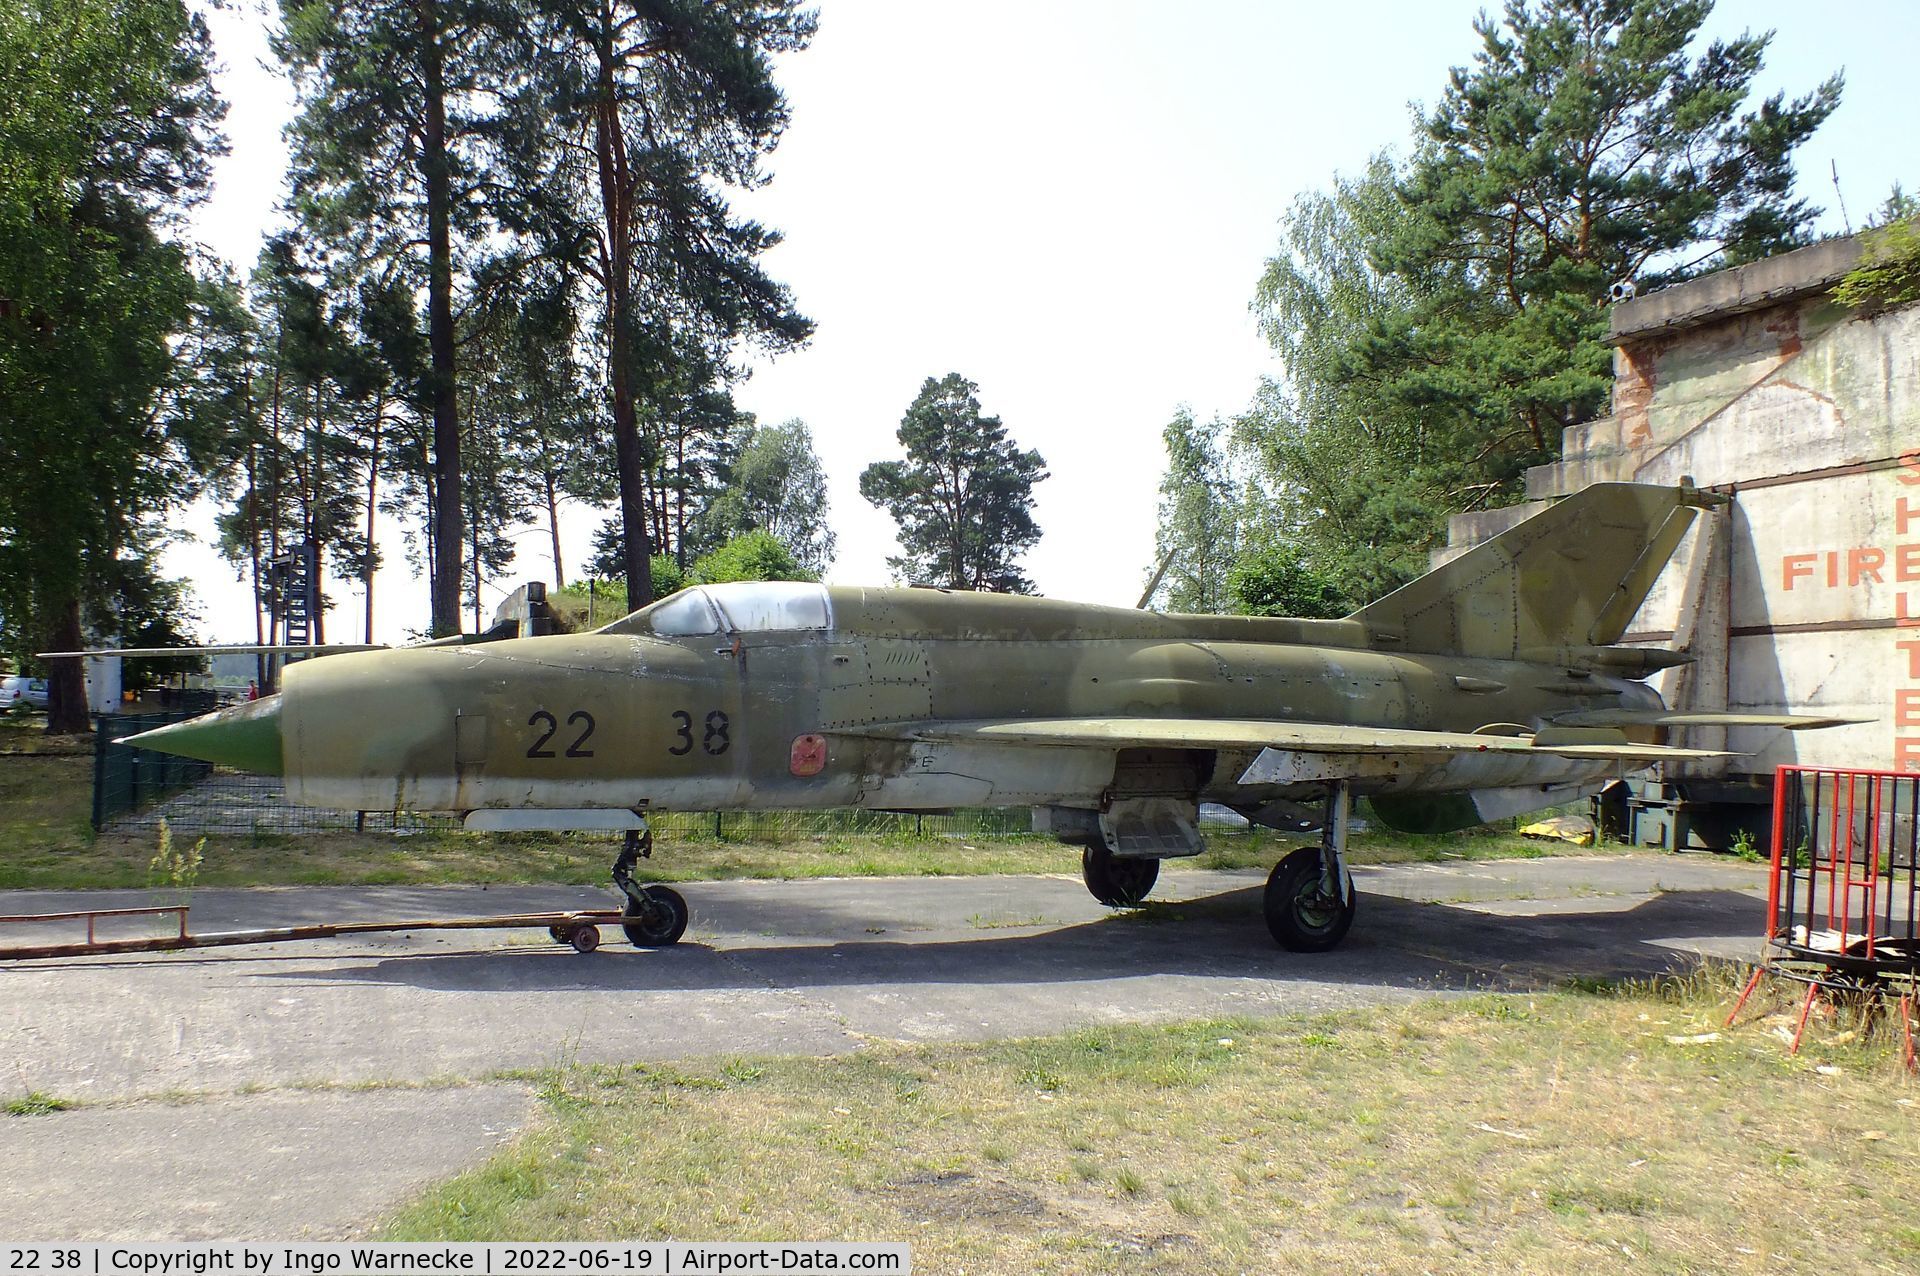 22 38, 1967 Mikoyan-Gurevich MiG-21SPS C/N 94A5509, Mikoyan i Gurevich MiG-21SPS FISHBED-F at the Luftfahrtmuseum Finowfurt